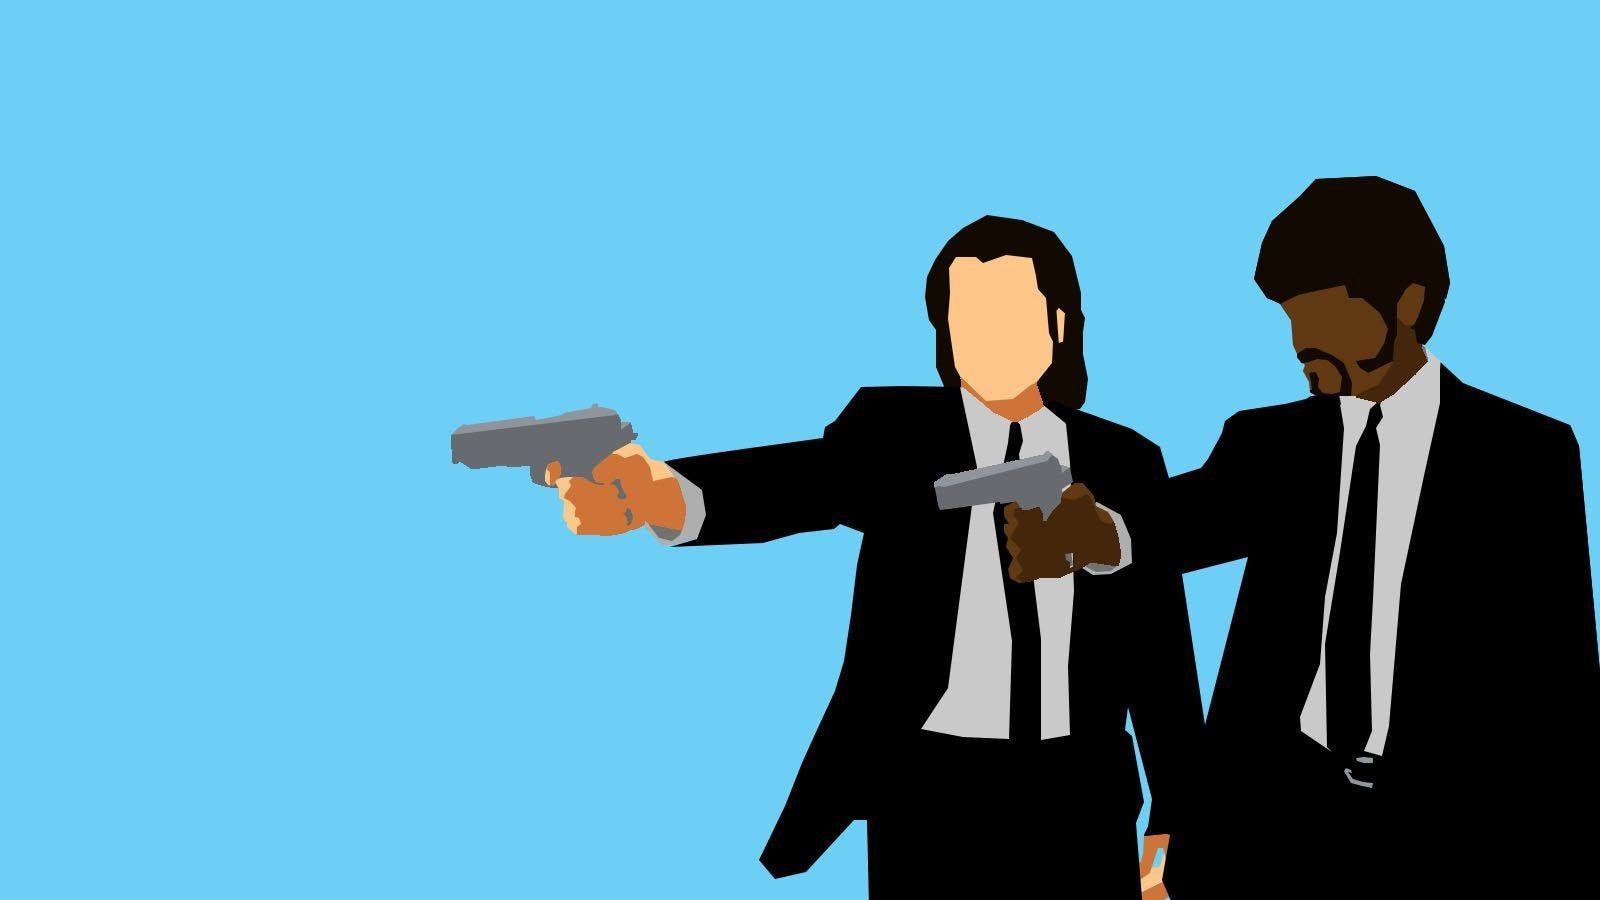 Pulp Fiction Minimalist Wallpapers Top Free Pulp Fiction Minimalist Backgrounds Wallpaperaccess